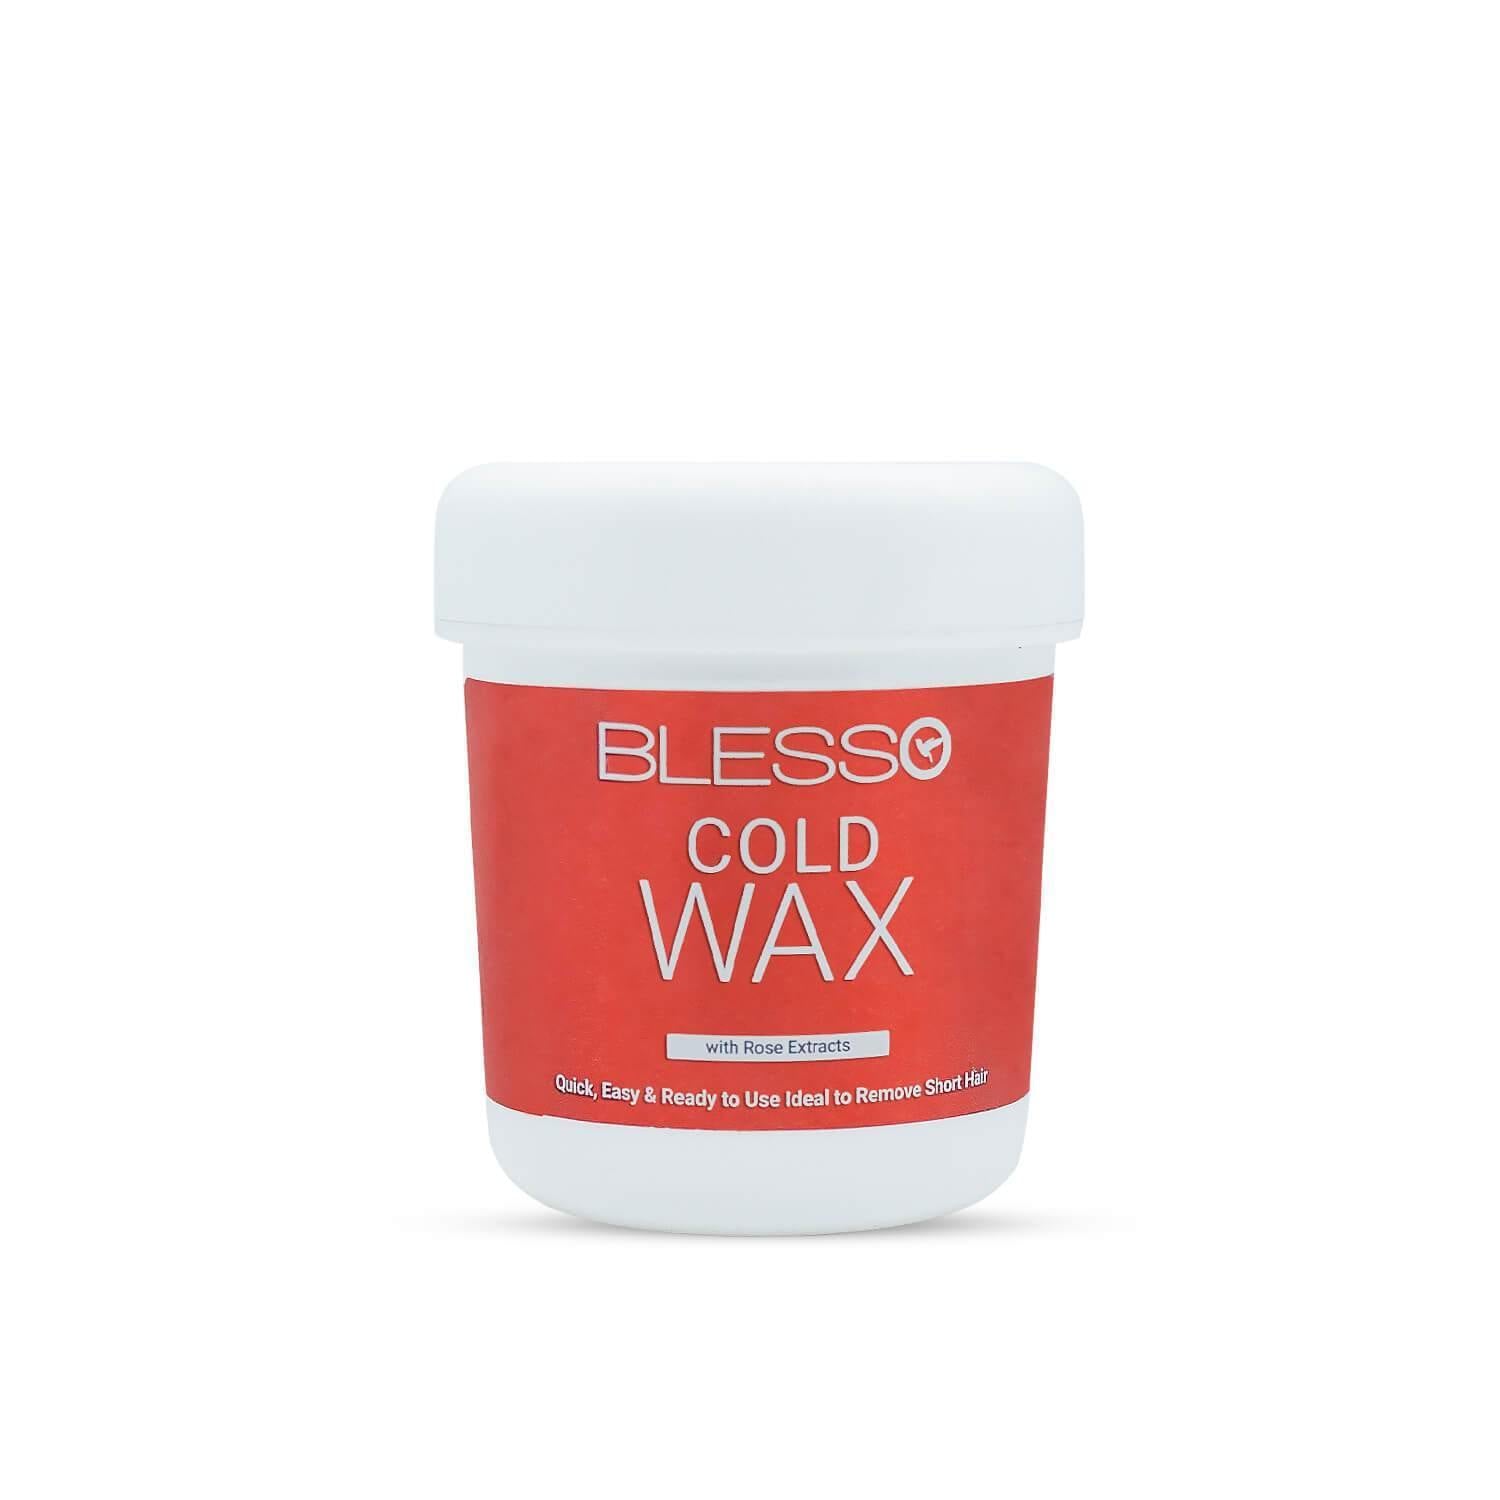 Blesso Cold Wax with Rose Extract - Blesso Cosmetics